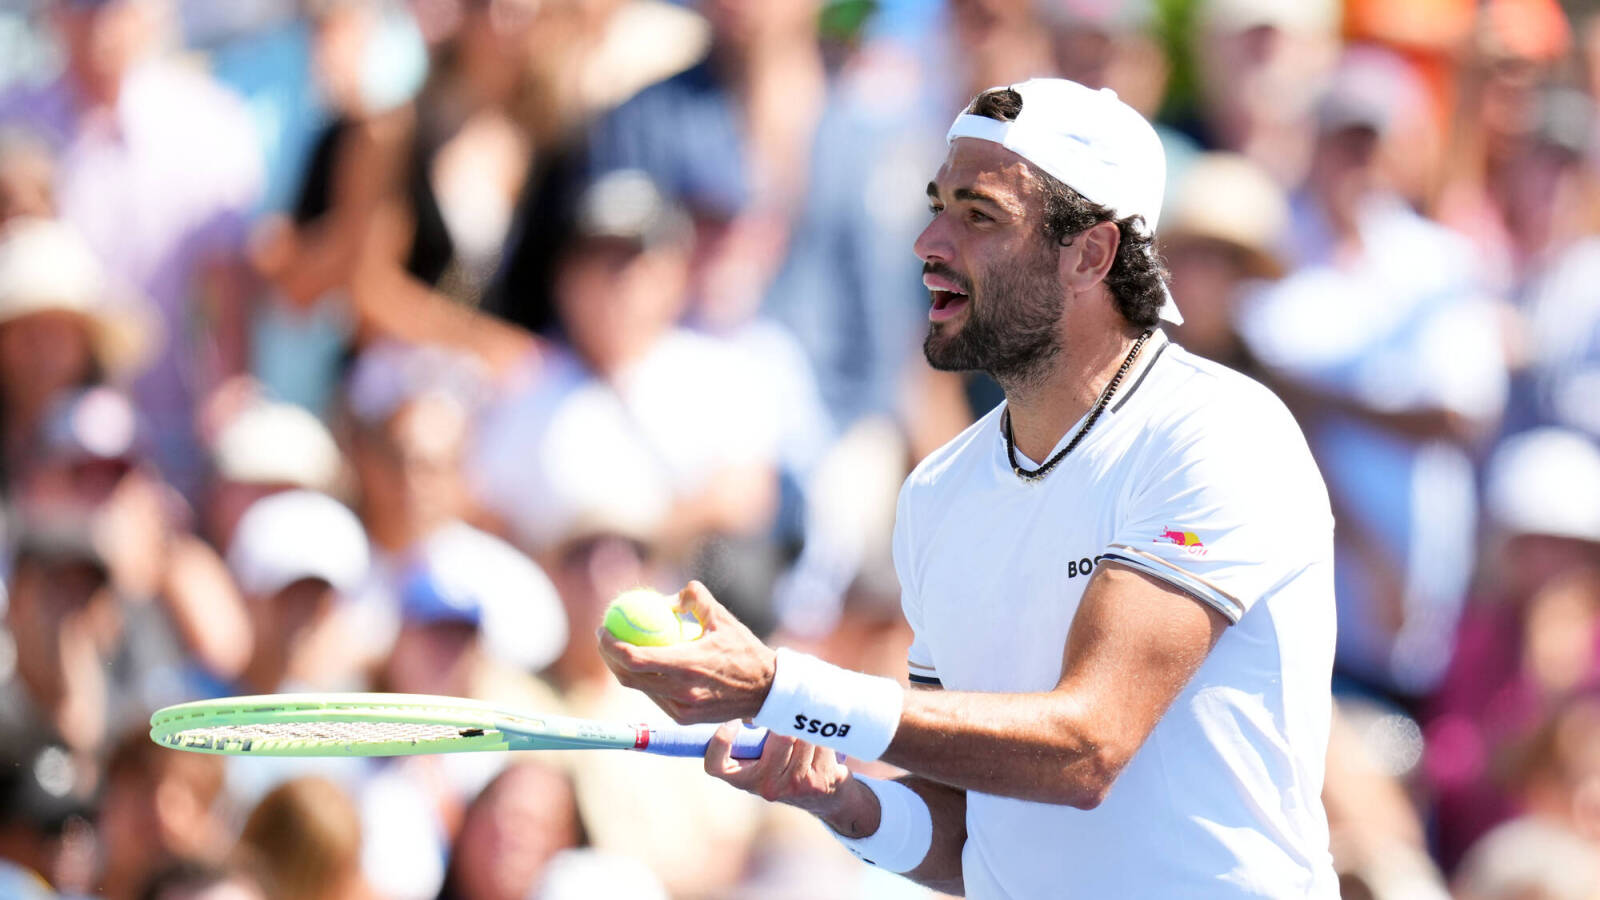 Watch: Matteo Berrettini secures first win of the season with an astounding comeback at Phoenix as compatriot Jannik Sinner inches closer to victory at the Indian Wells